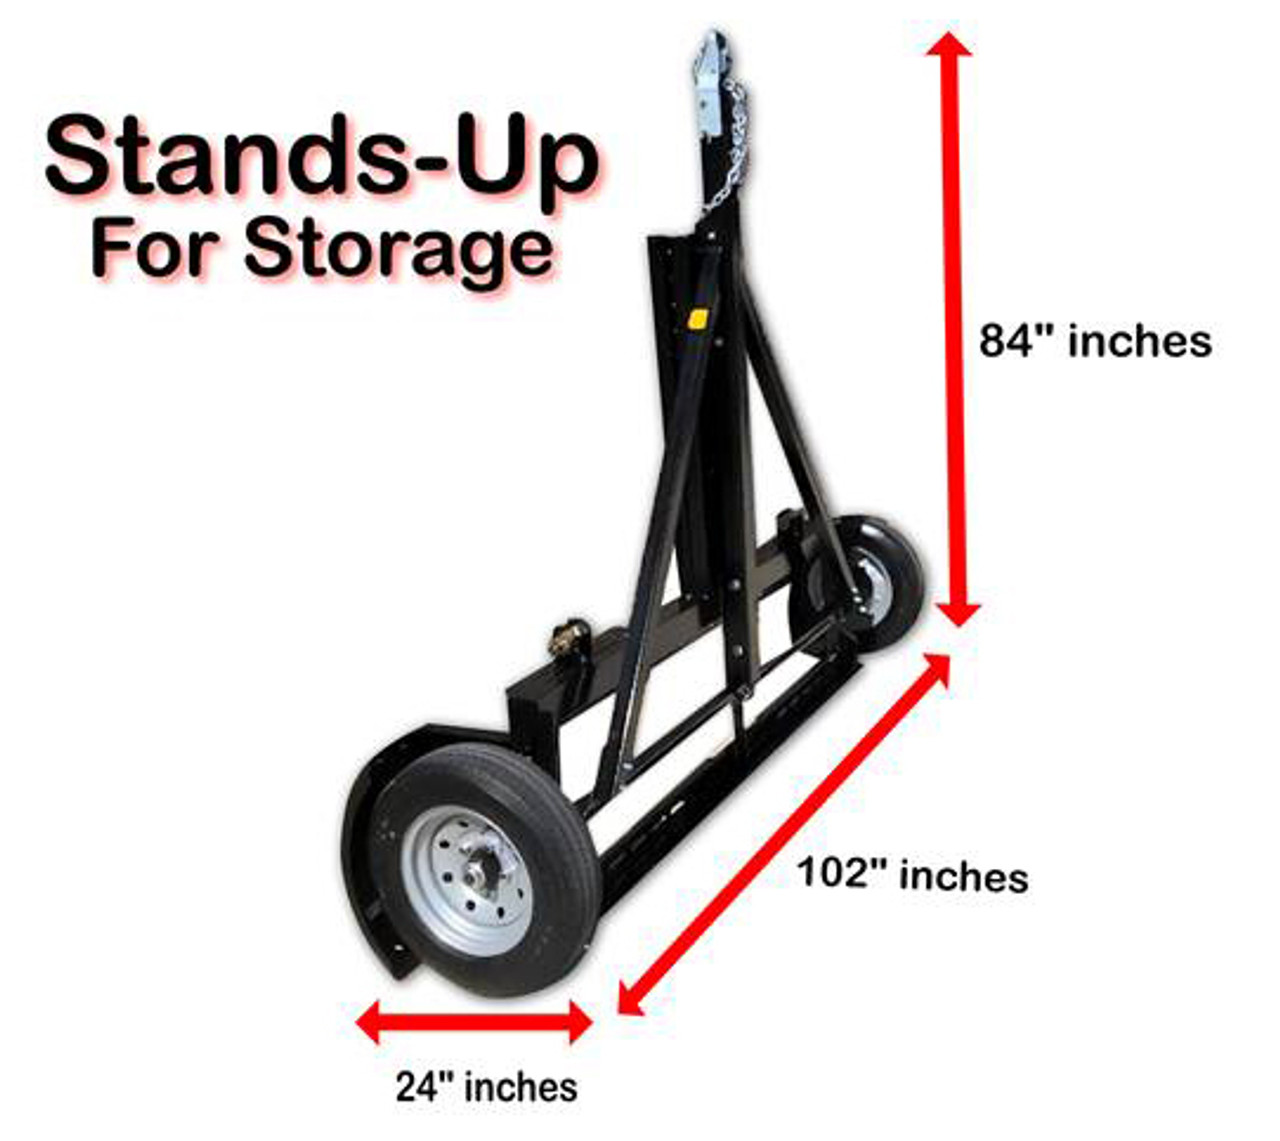 Stand-Up EZ Haul Idler Car Tow Dolly